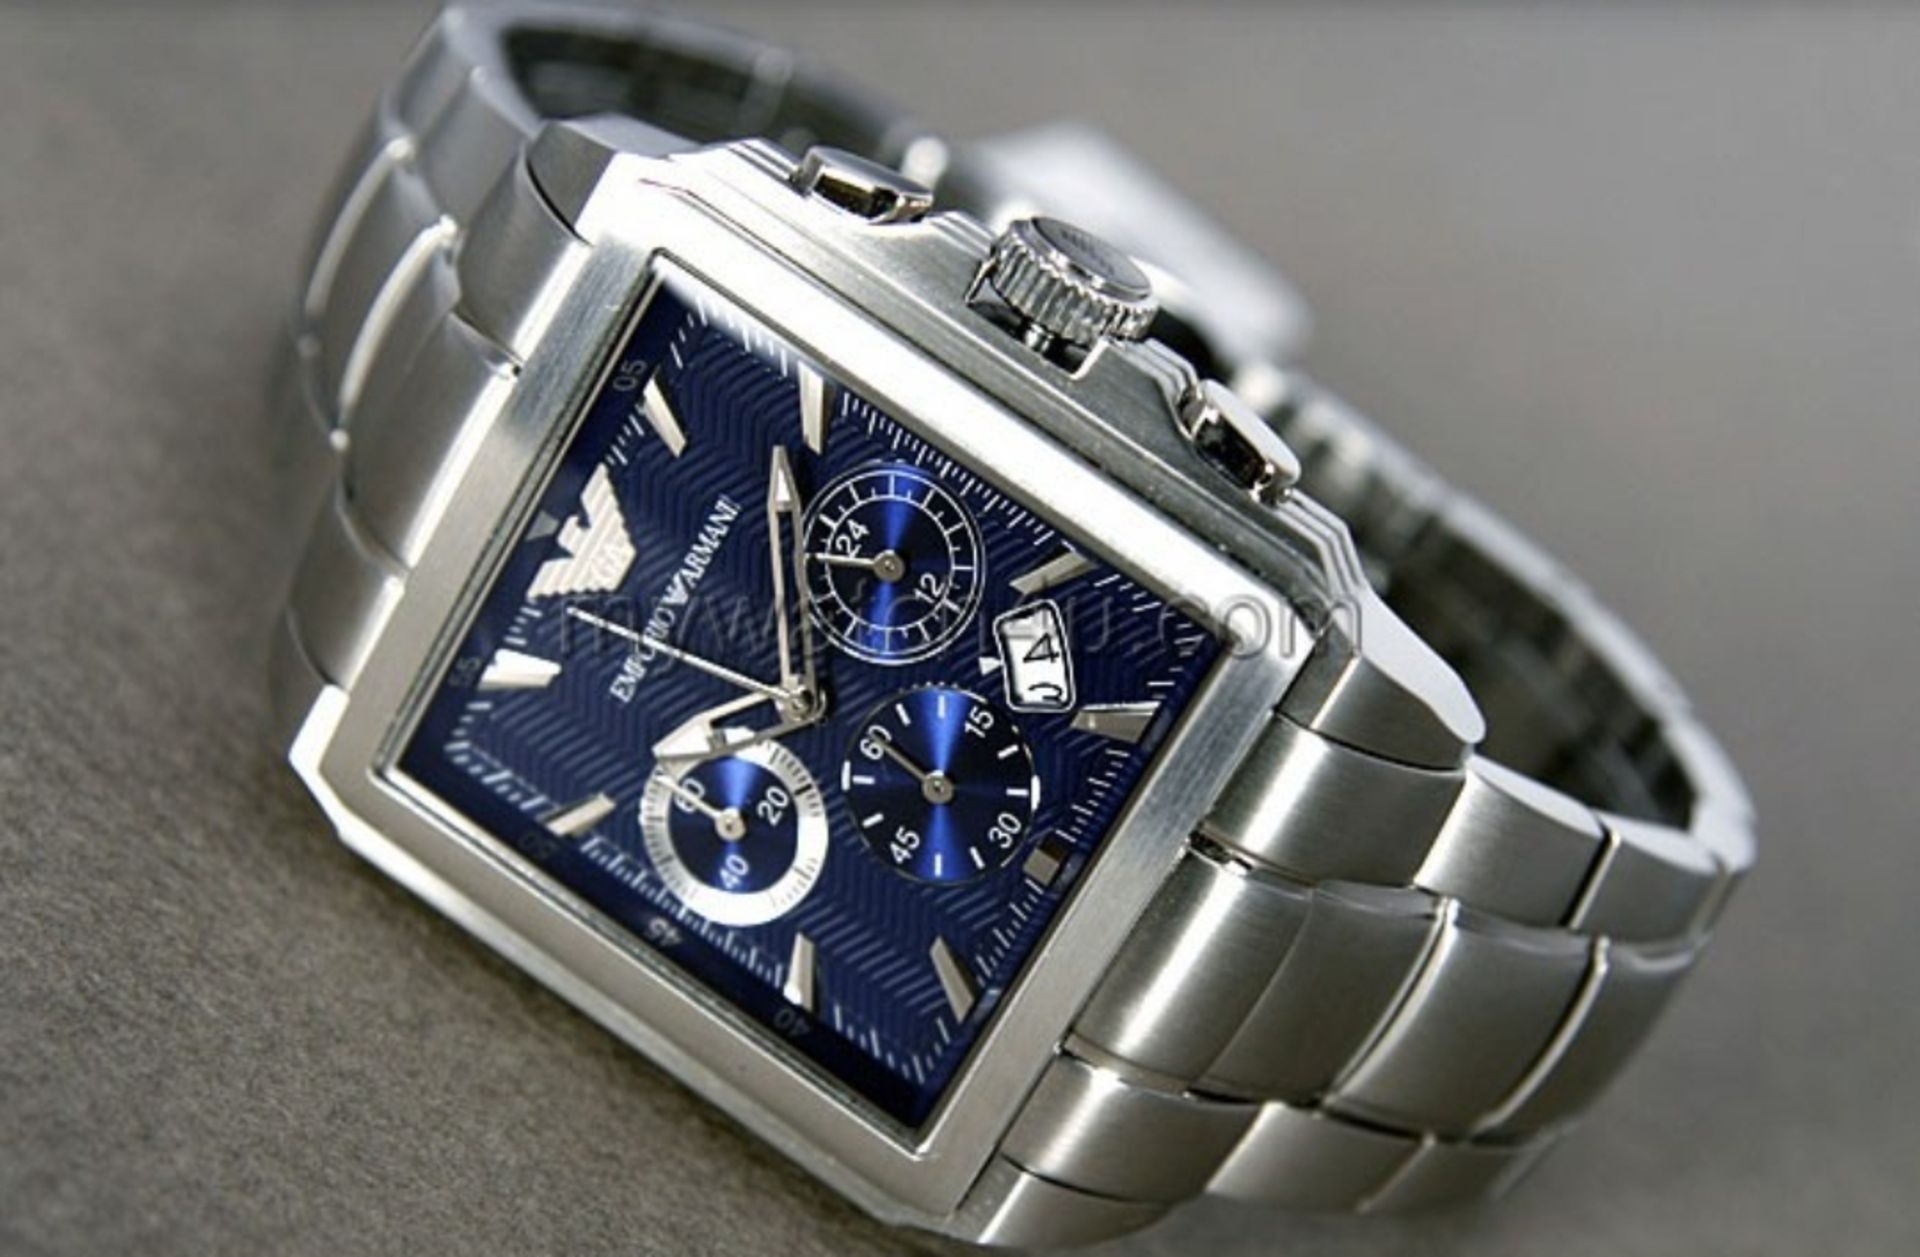 Emporio Armani AR0660 Men's Square Dial Silver Stainless Steel Bracelet Chronograph Watch - Image 2 of 6